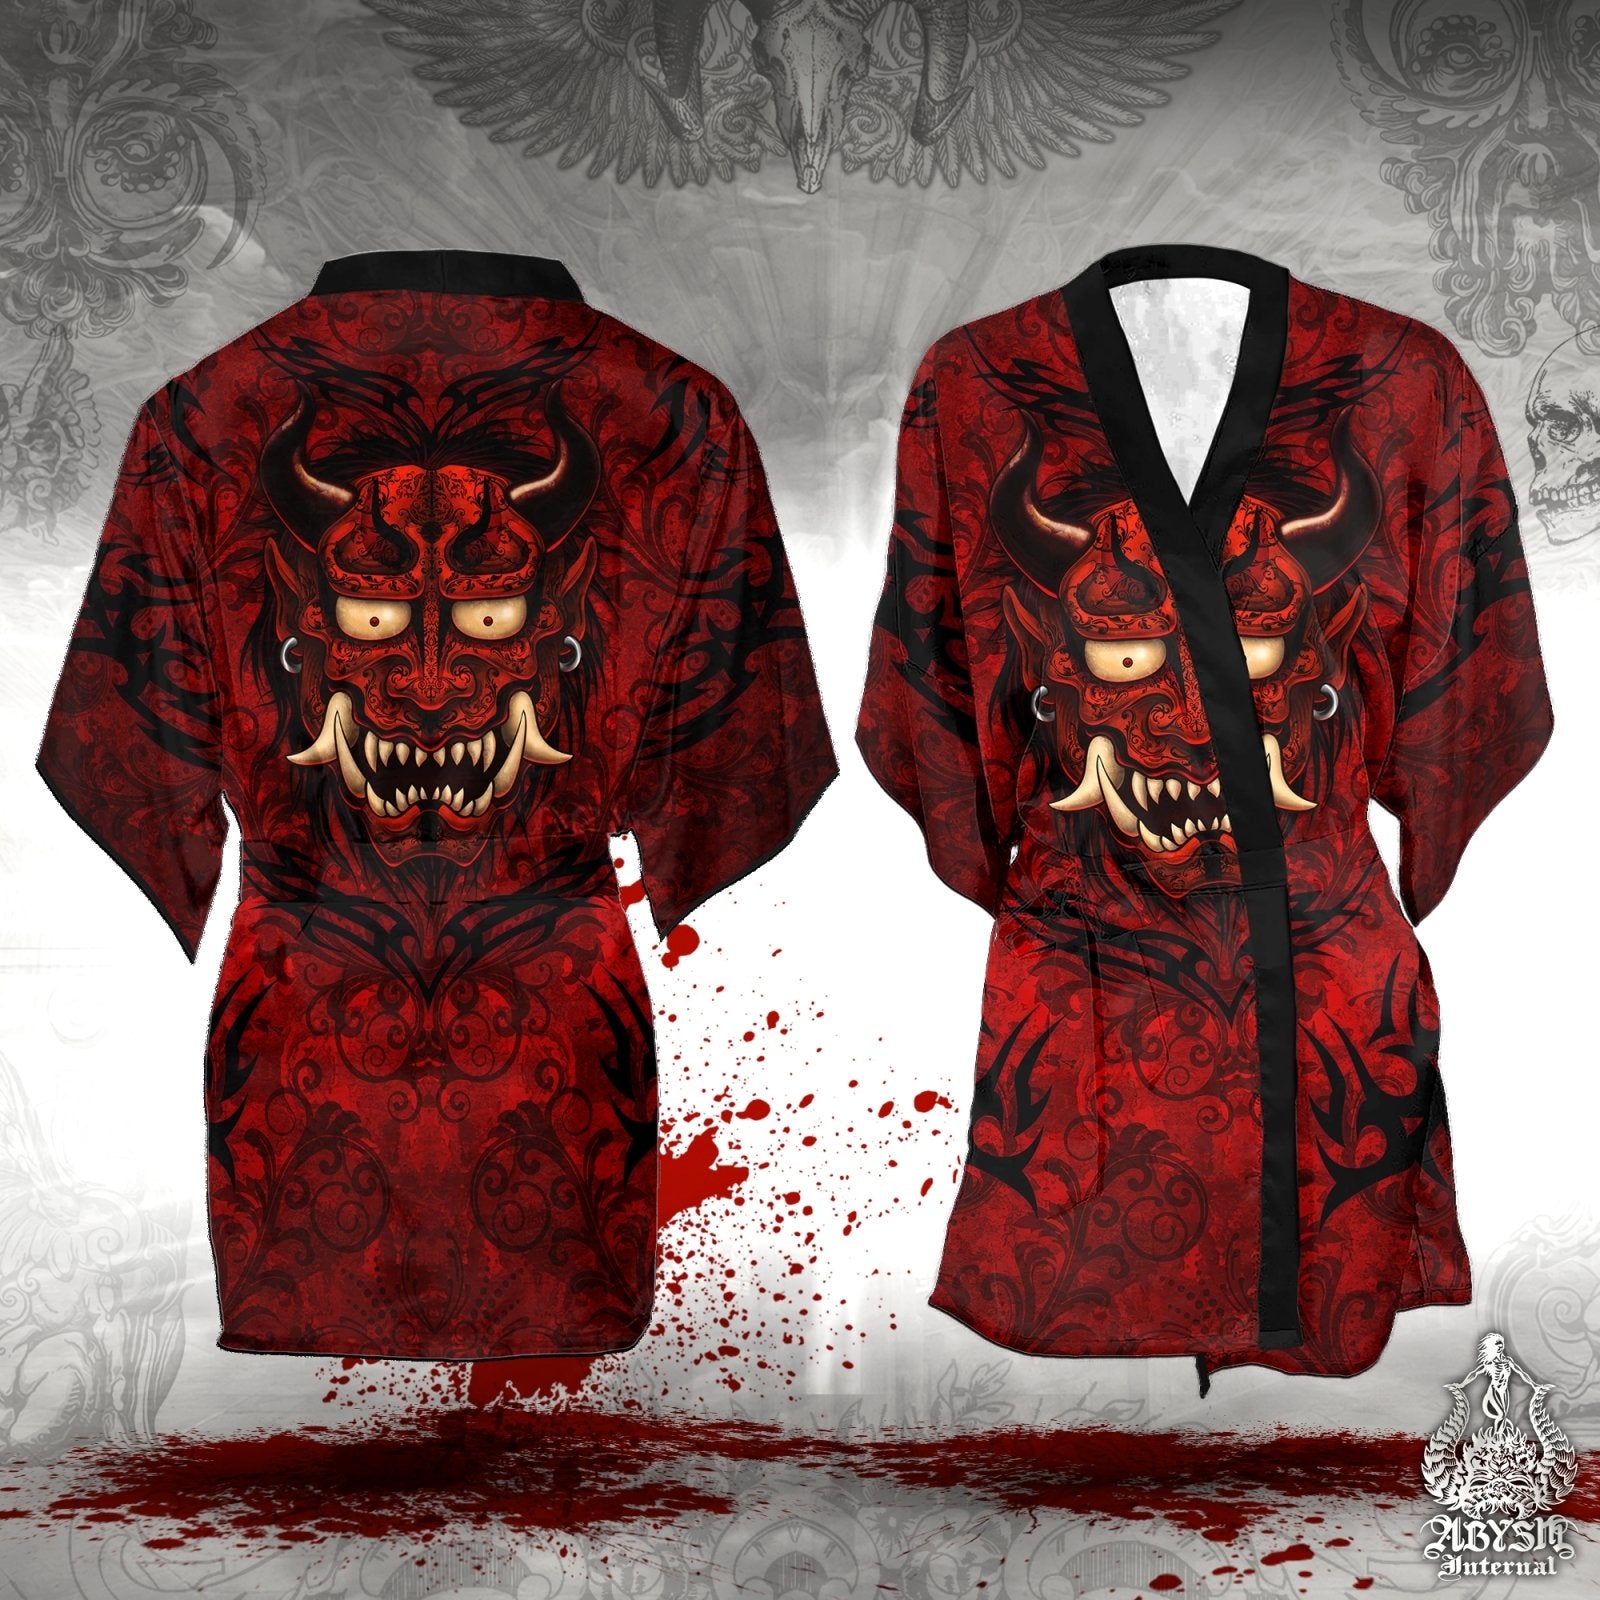 Demon Cover Up, Beach Outfit, Oni Party Kimono, Japanese Summer Festival Robe, Indie and Alternative Clothing, Unisex - Red Black Tattoo - Abysm Internal